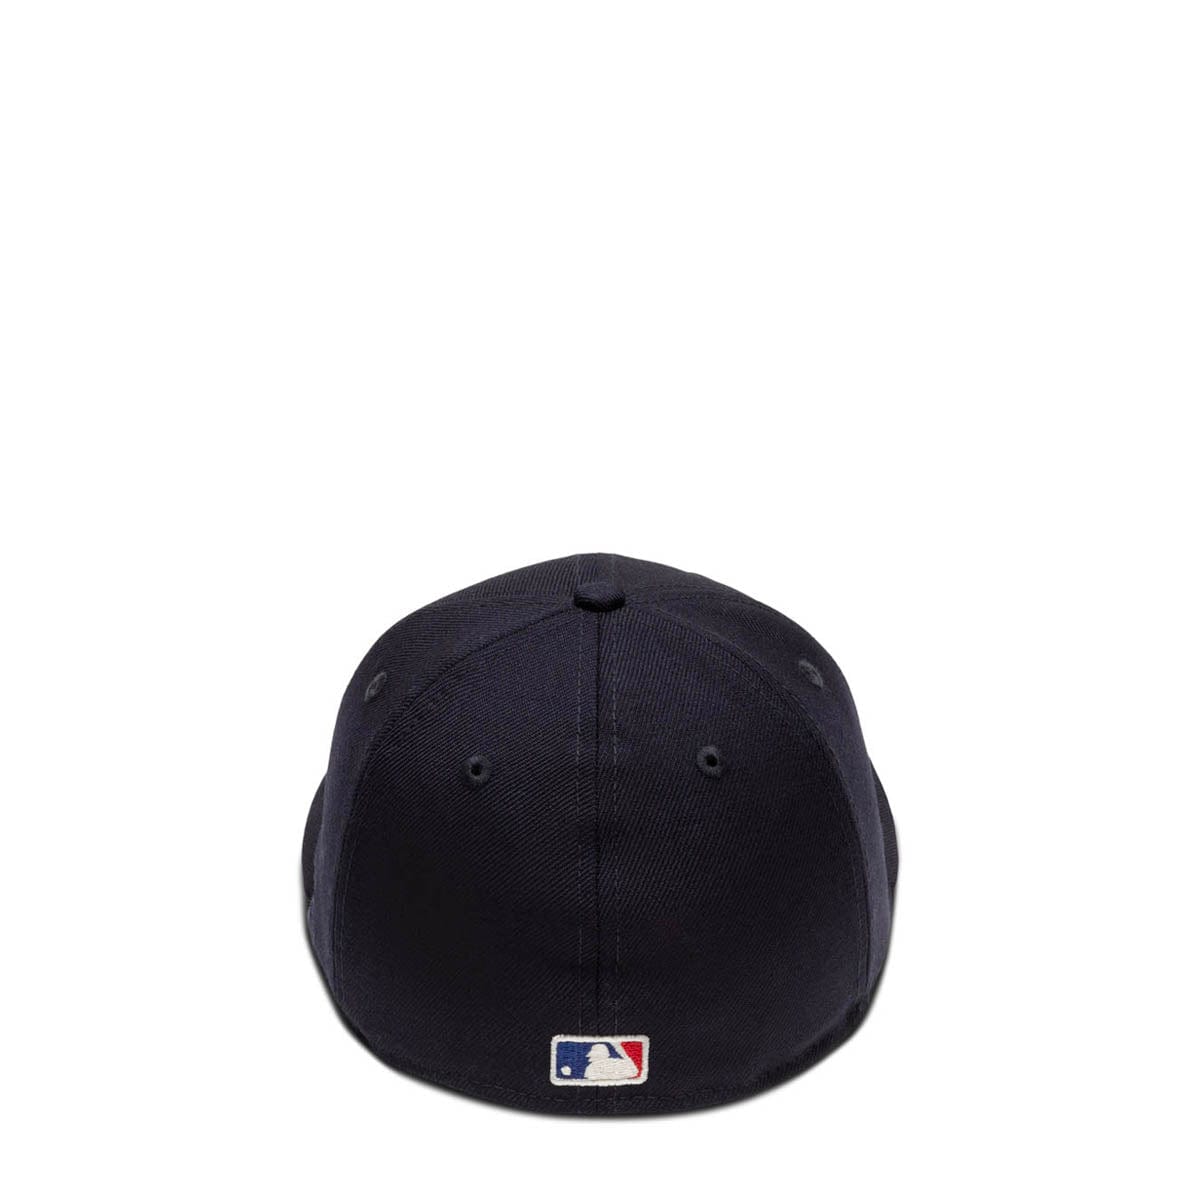 New Era X FOG 59FIFTY BOSTON RED SOX FITTED CAP NAVY